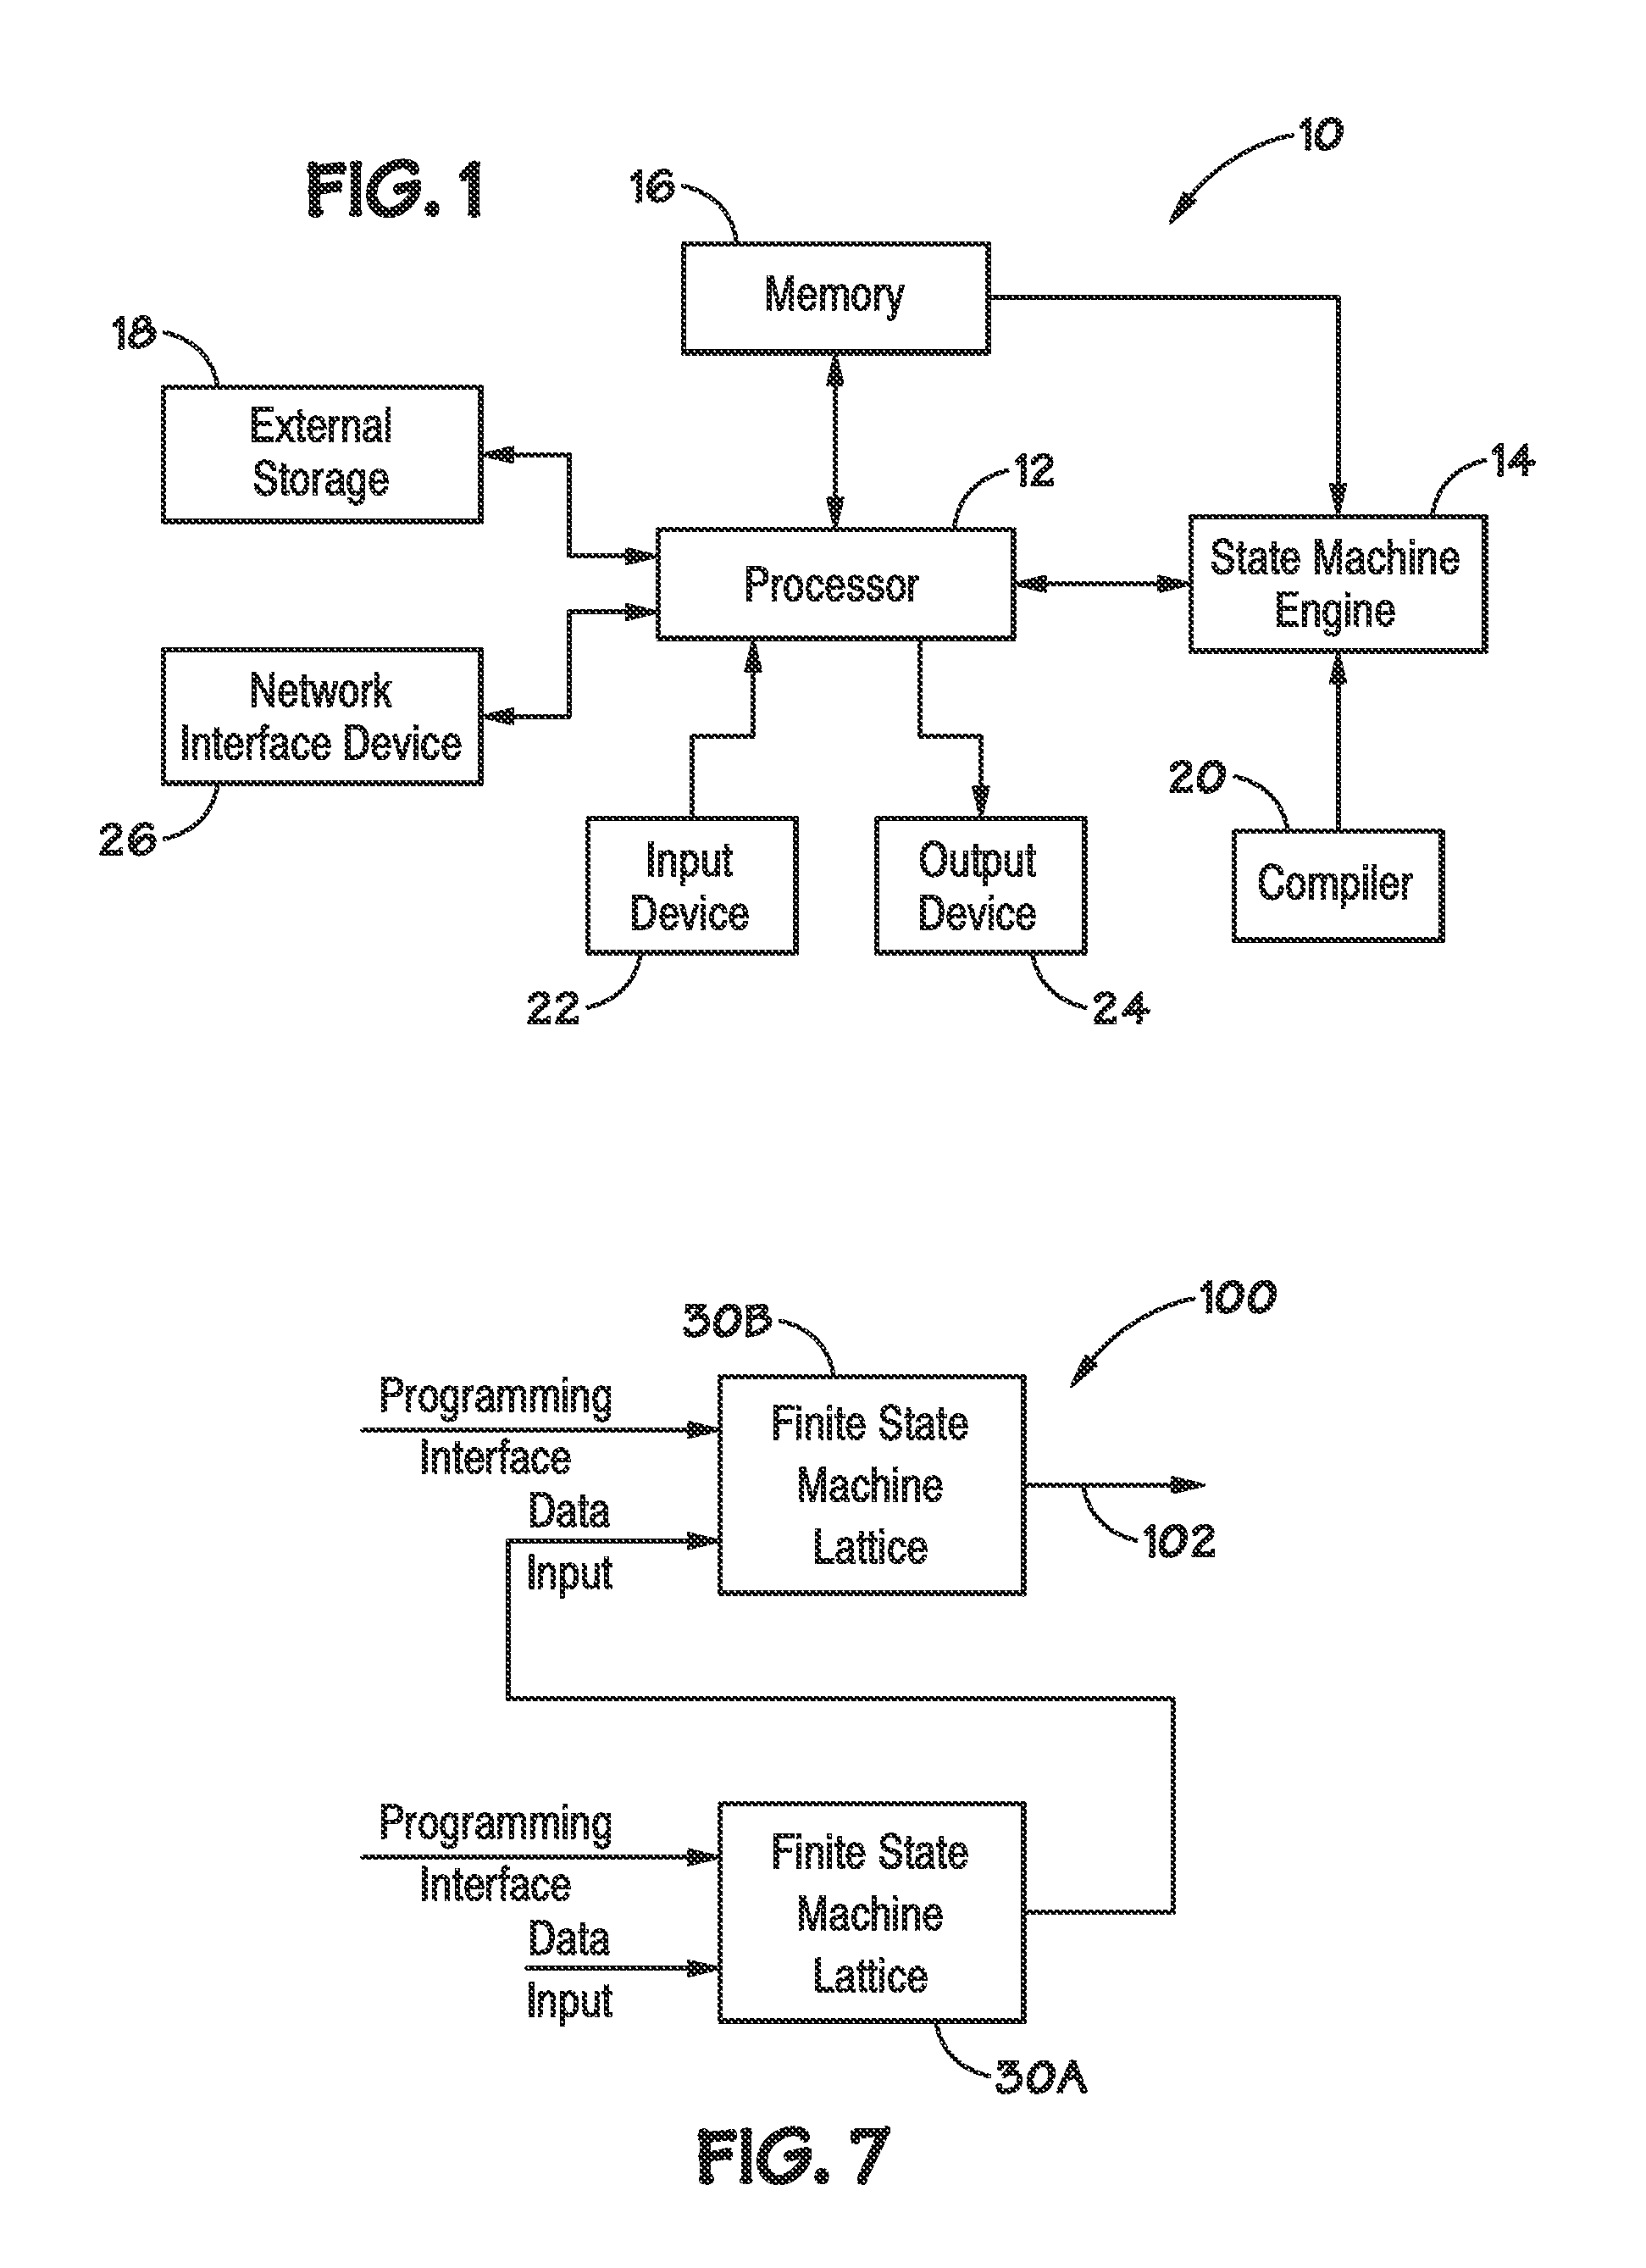 Instruction insertion in state machine engines